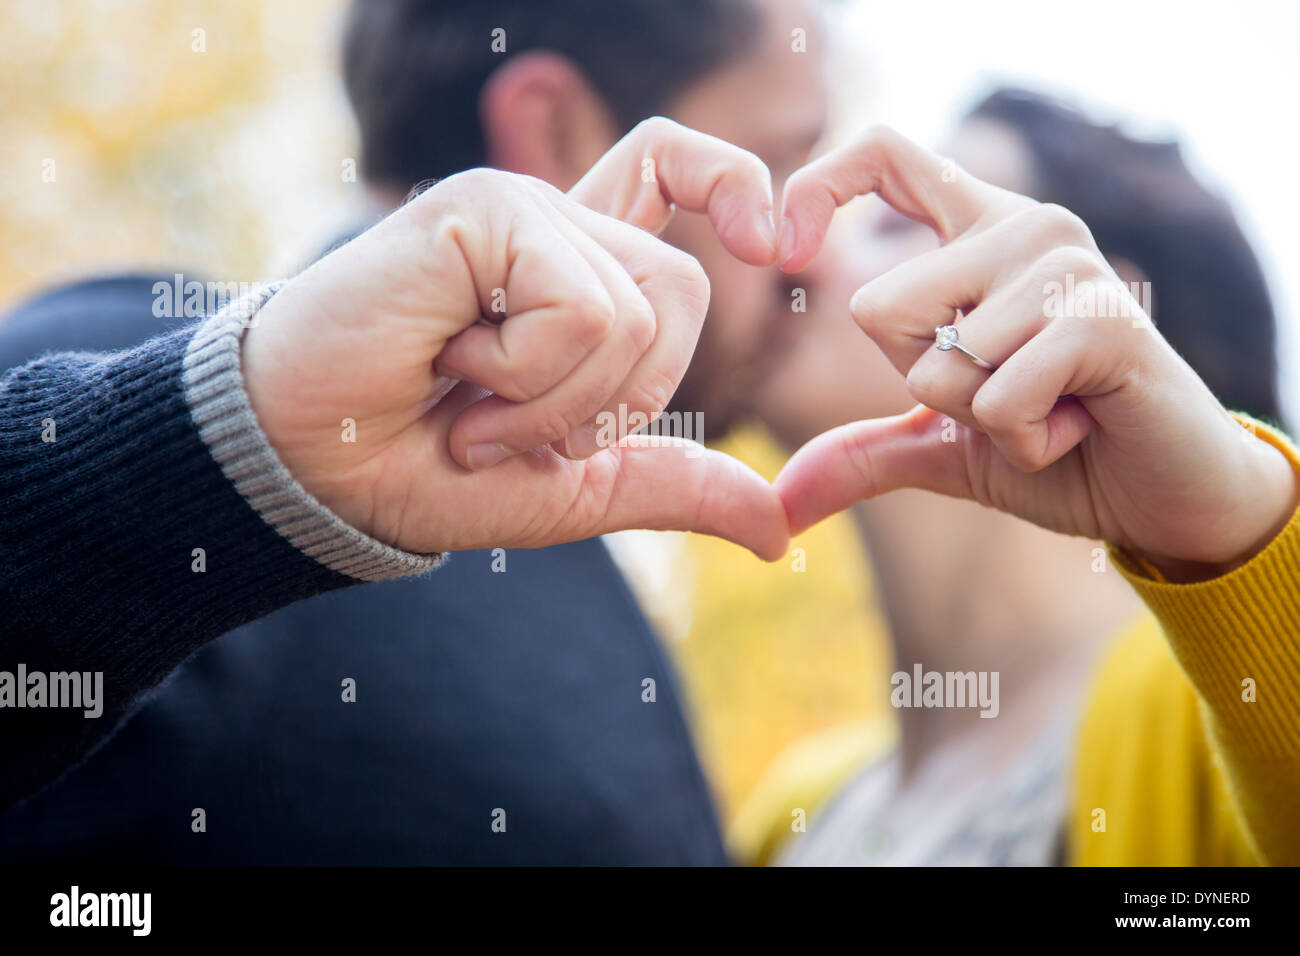 Caucasian couple making heart shape with fingers Stock Photo - Alamy